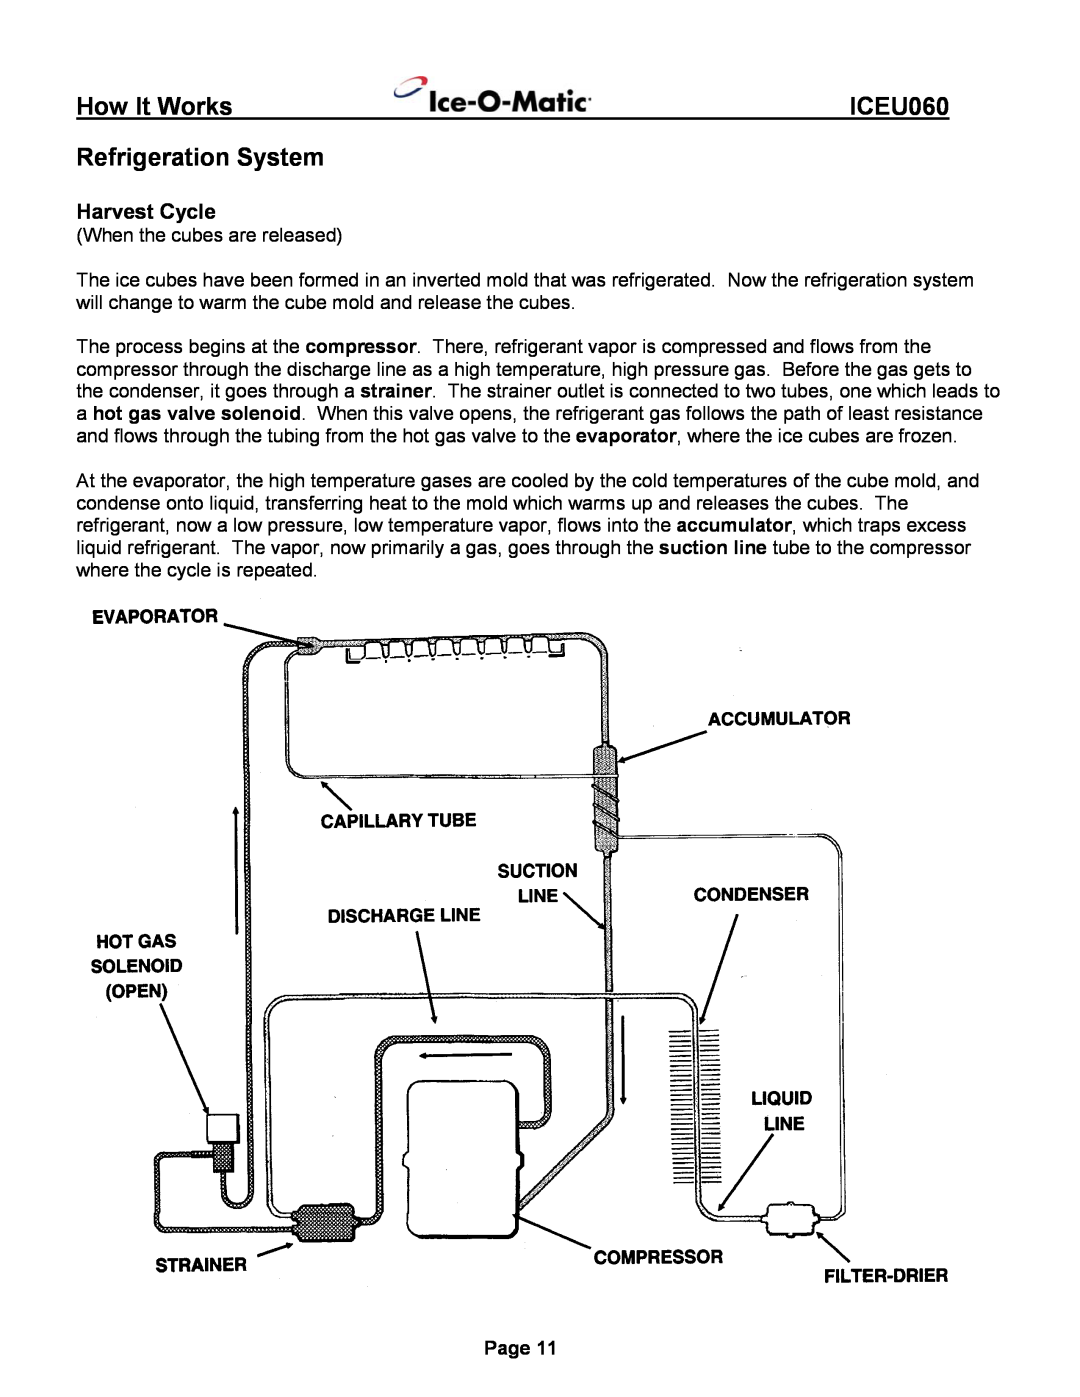 Ice-O-Matic ICEU060 installation manual How It Works, Refrigeration System, When the cubes are released, Page 